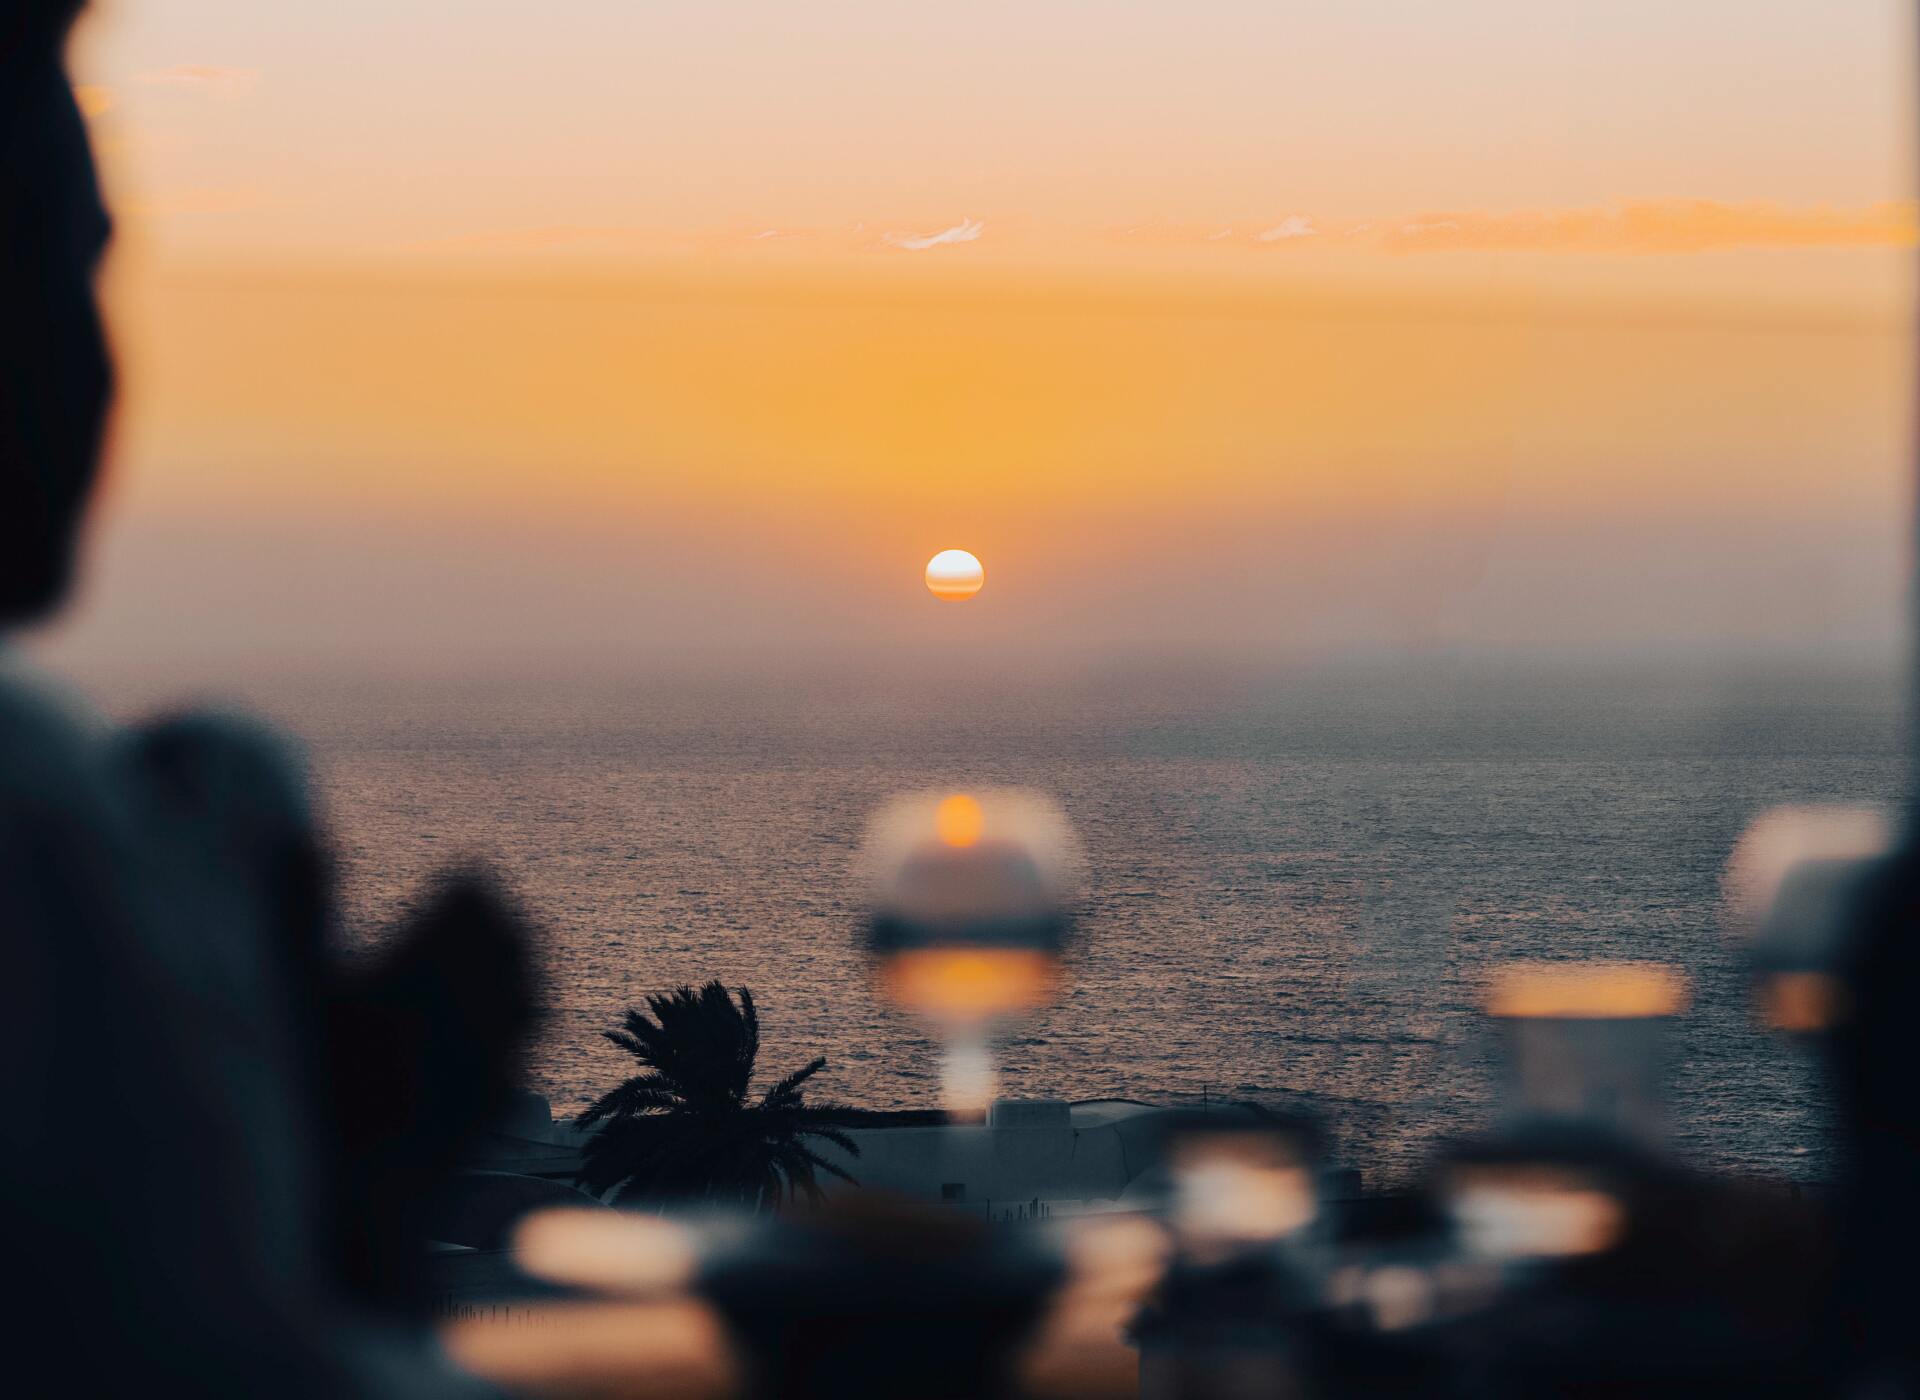 A blurry picture of a sunset over the ocean